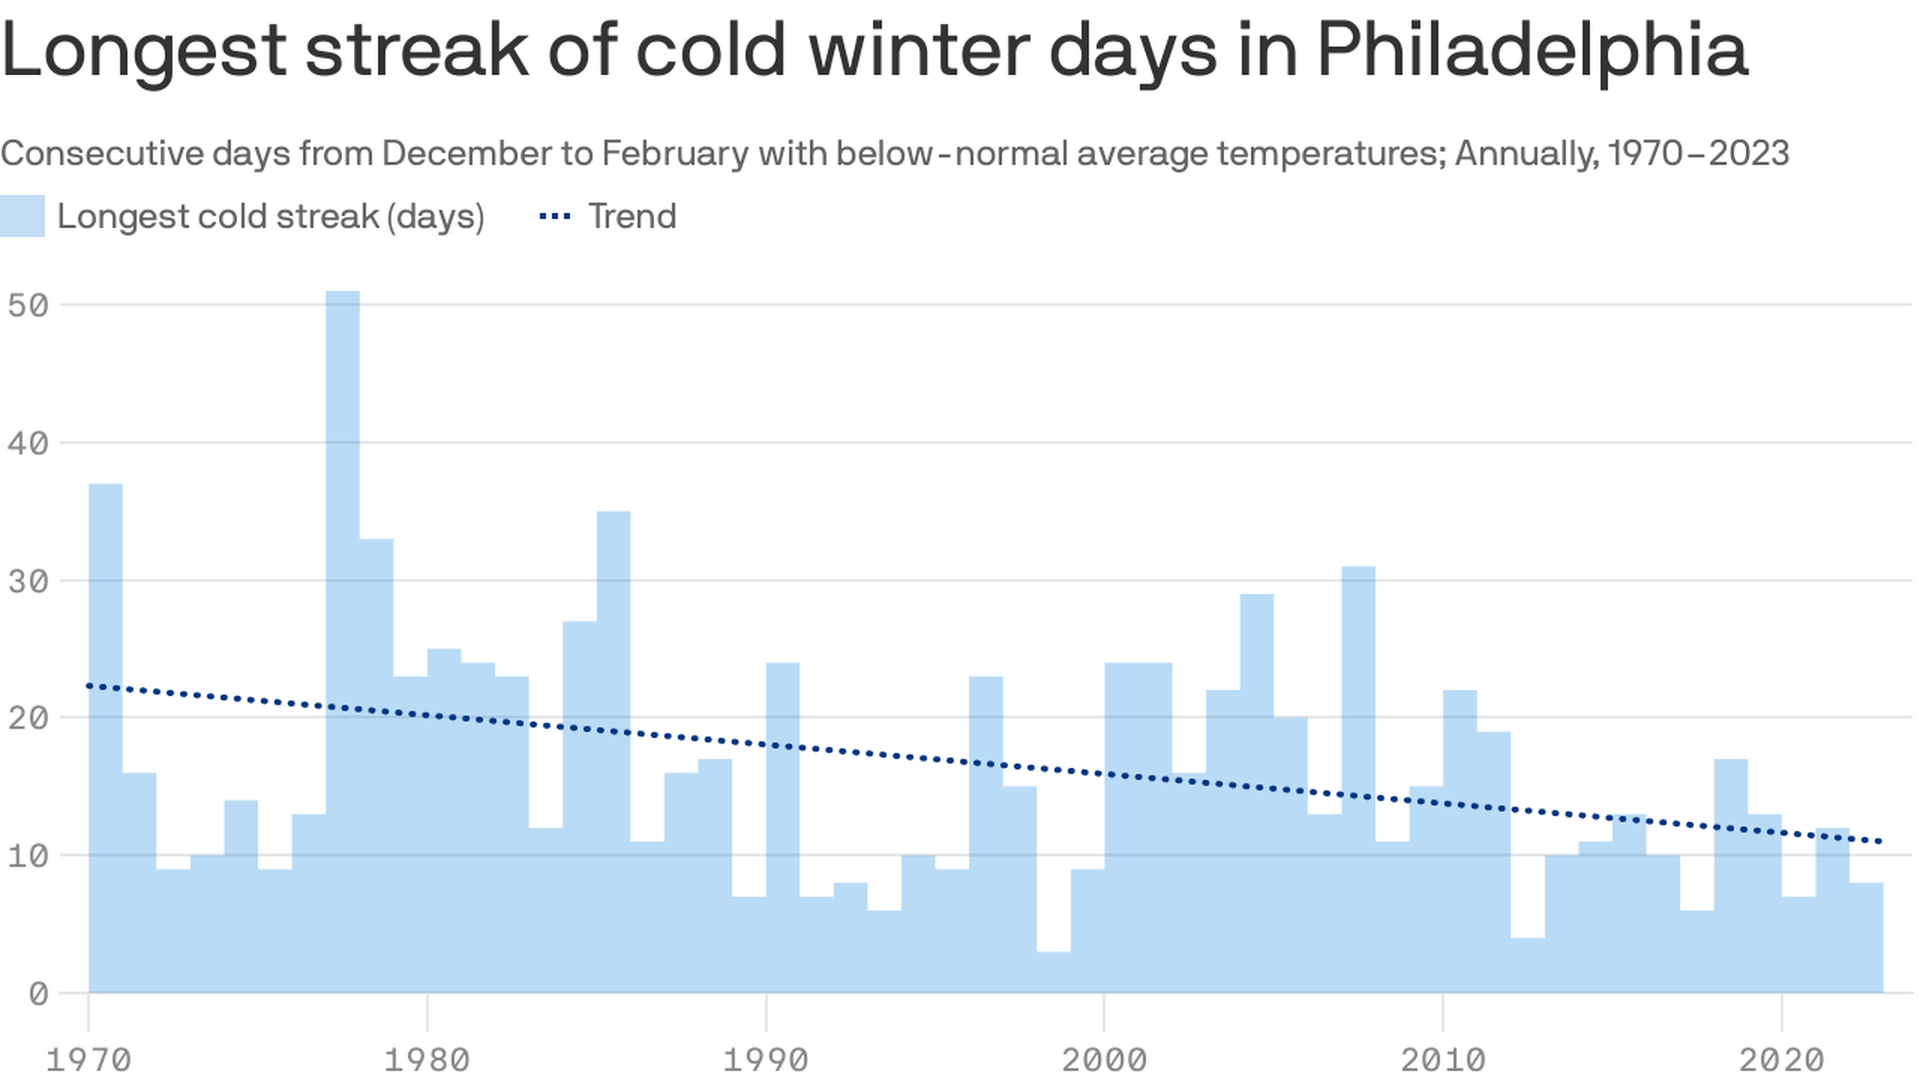 A chart of the longest streak of cold winter days in Philly going down 